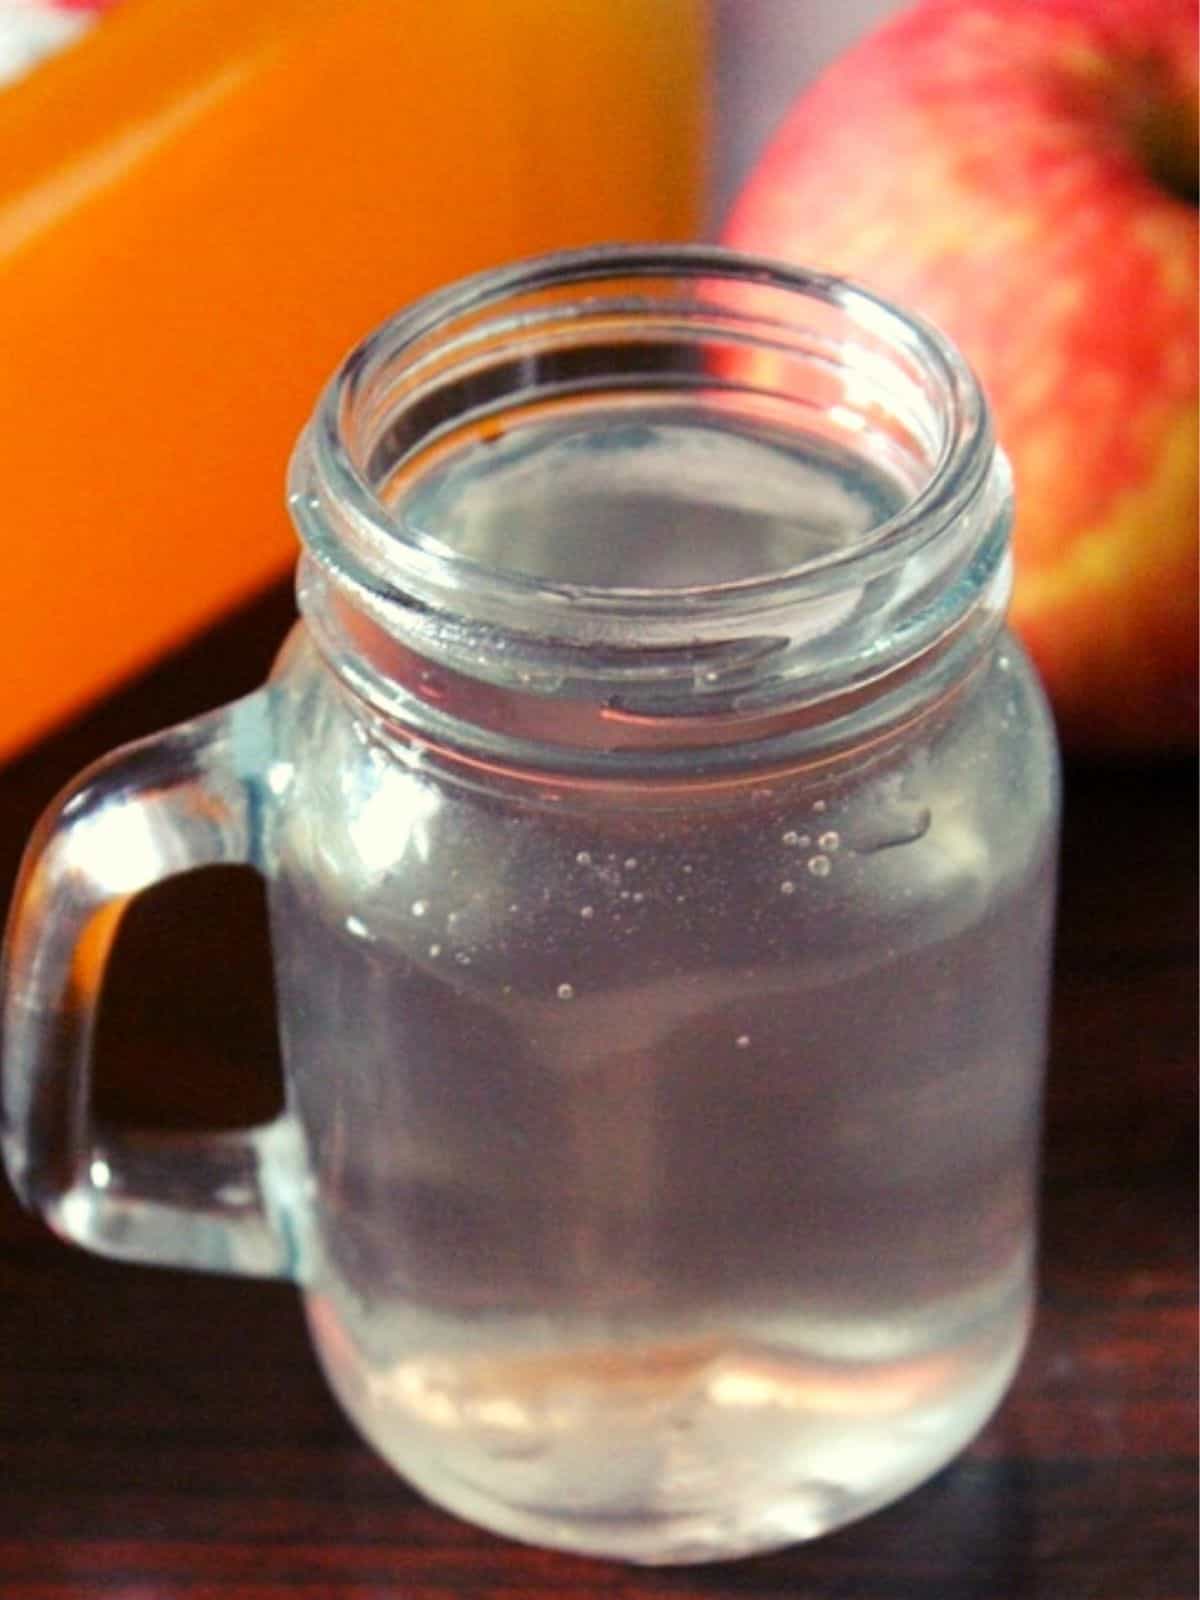 apple cider vinegar mixed in water and served in a glass jar